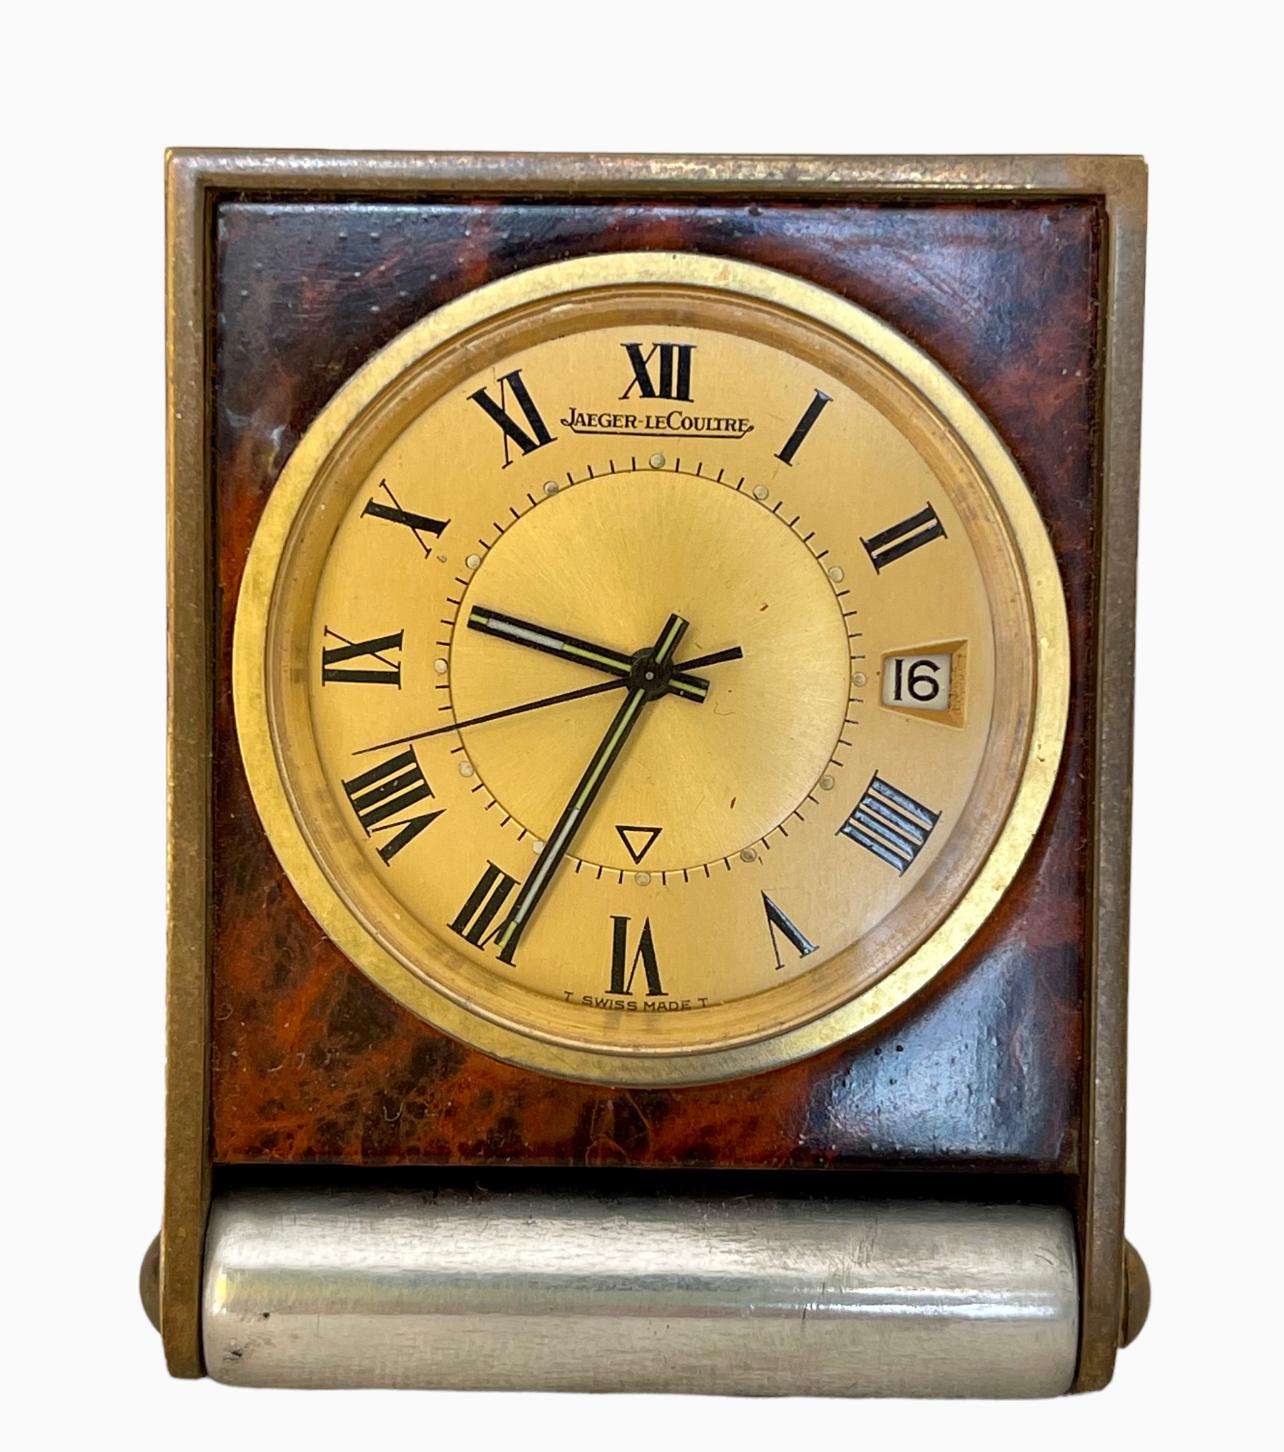 Pocket travel clock from Maison Jaeger-Lecoultre. It is in silver metal with a gold dial on a brown tortoiseshell background. Manual winding movement caliber 911. It works perfectly and has an alarm function. This clock dates from the 70s, is in